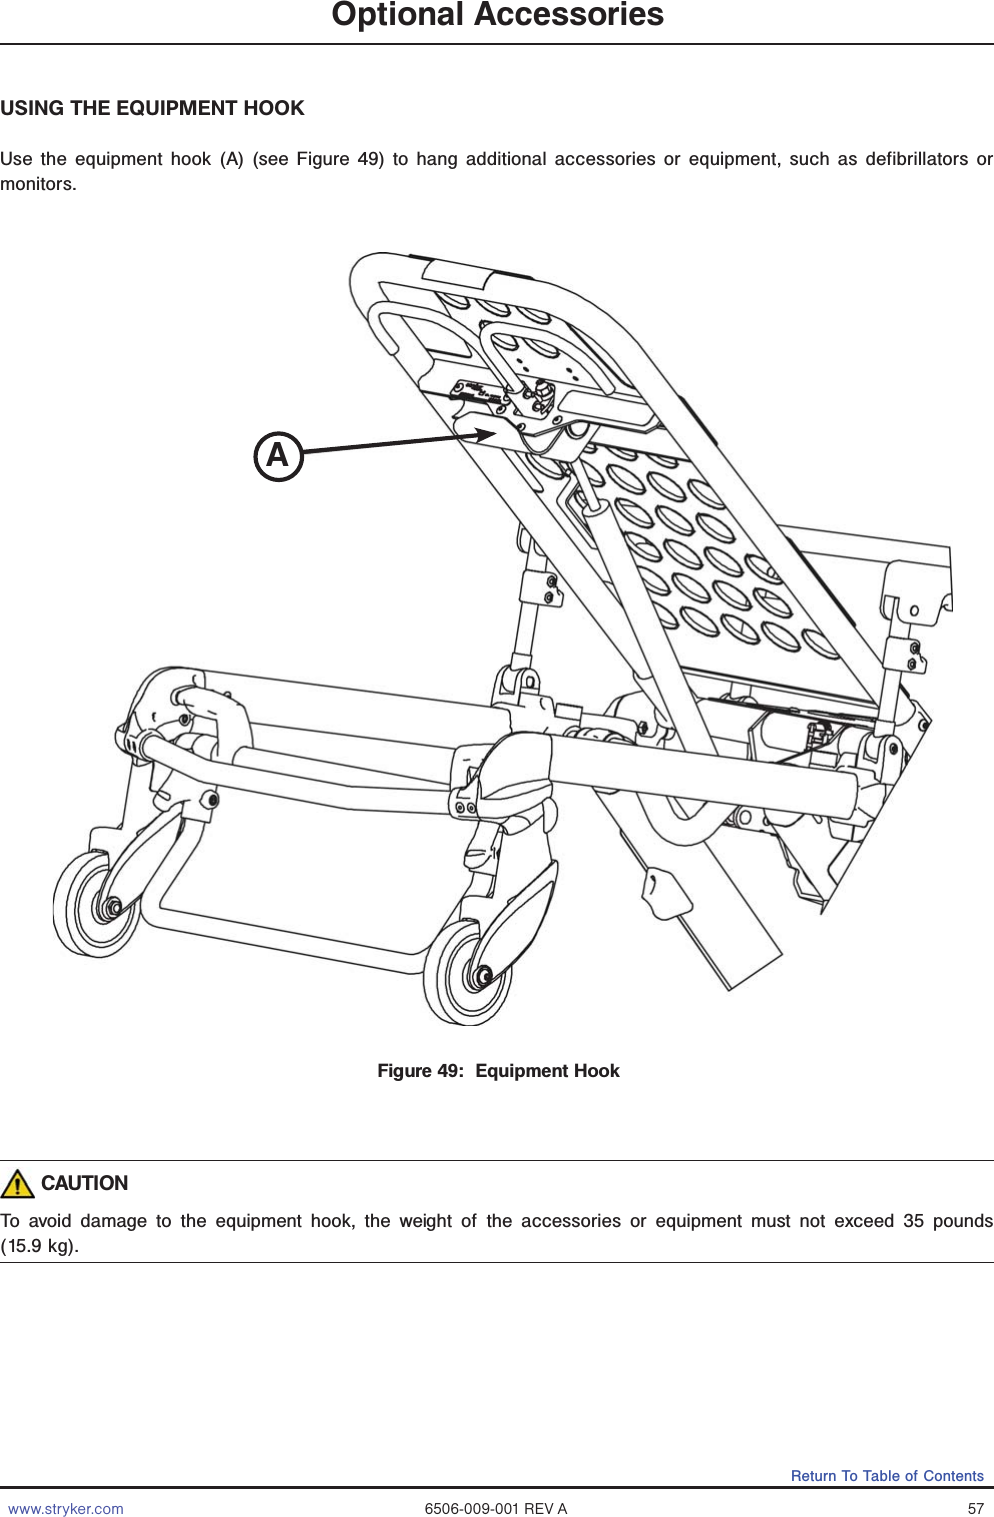 www.stryker.com 6506-009-001 REV A 57Return To Table of ContentsOptional AccessoriesUSING THE EQUIPMENT HOOKUse the equipment hook (A) (see Figure 49) to hang additional accessories or equipment, such as defibrillators or monitors. CAUTIONTo avoid damage to the equipment hook, the weight of the accessories or equipment must not exceed 35 pounds (15.9 kg).Figure 49:  Equipment Hook A